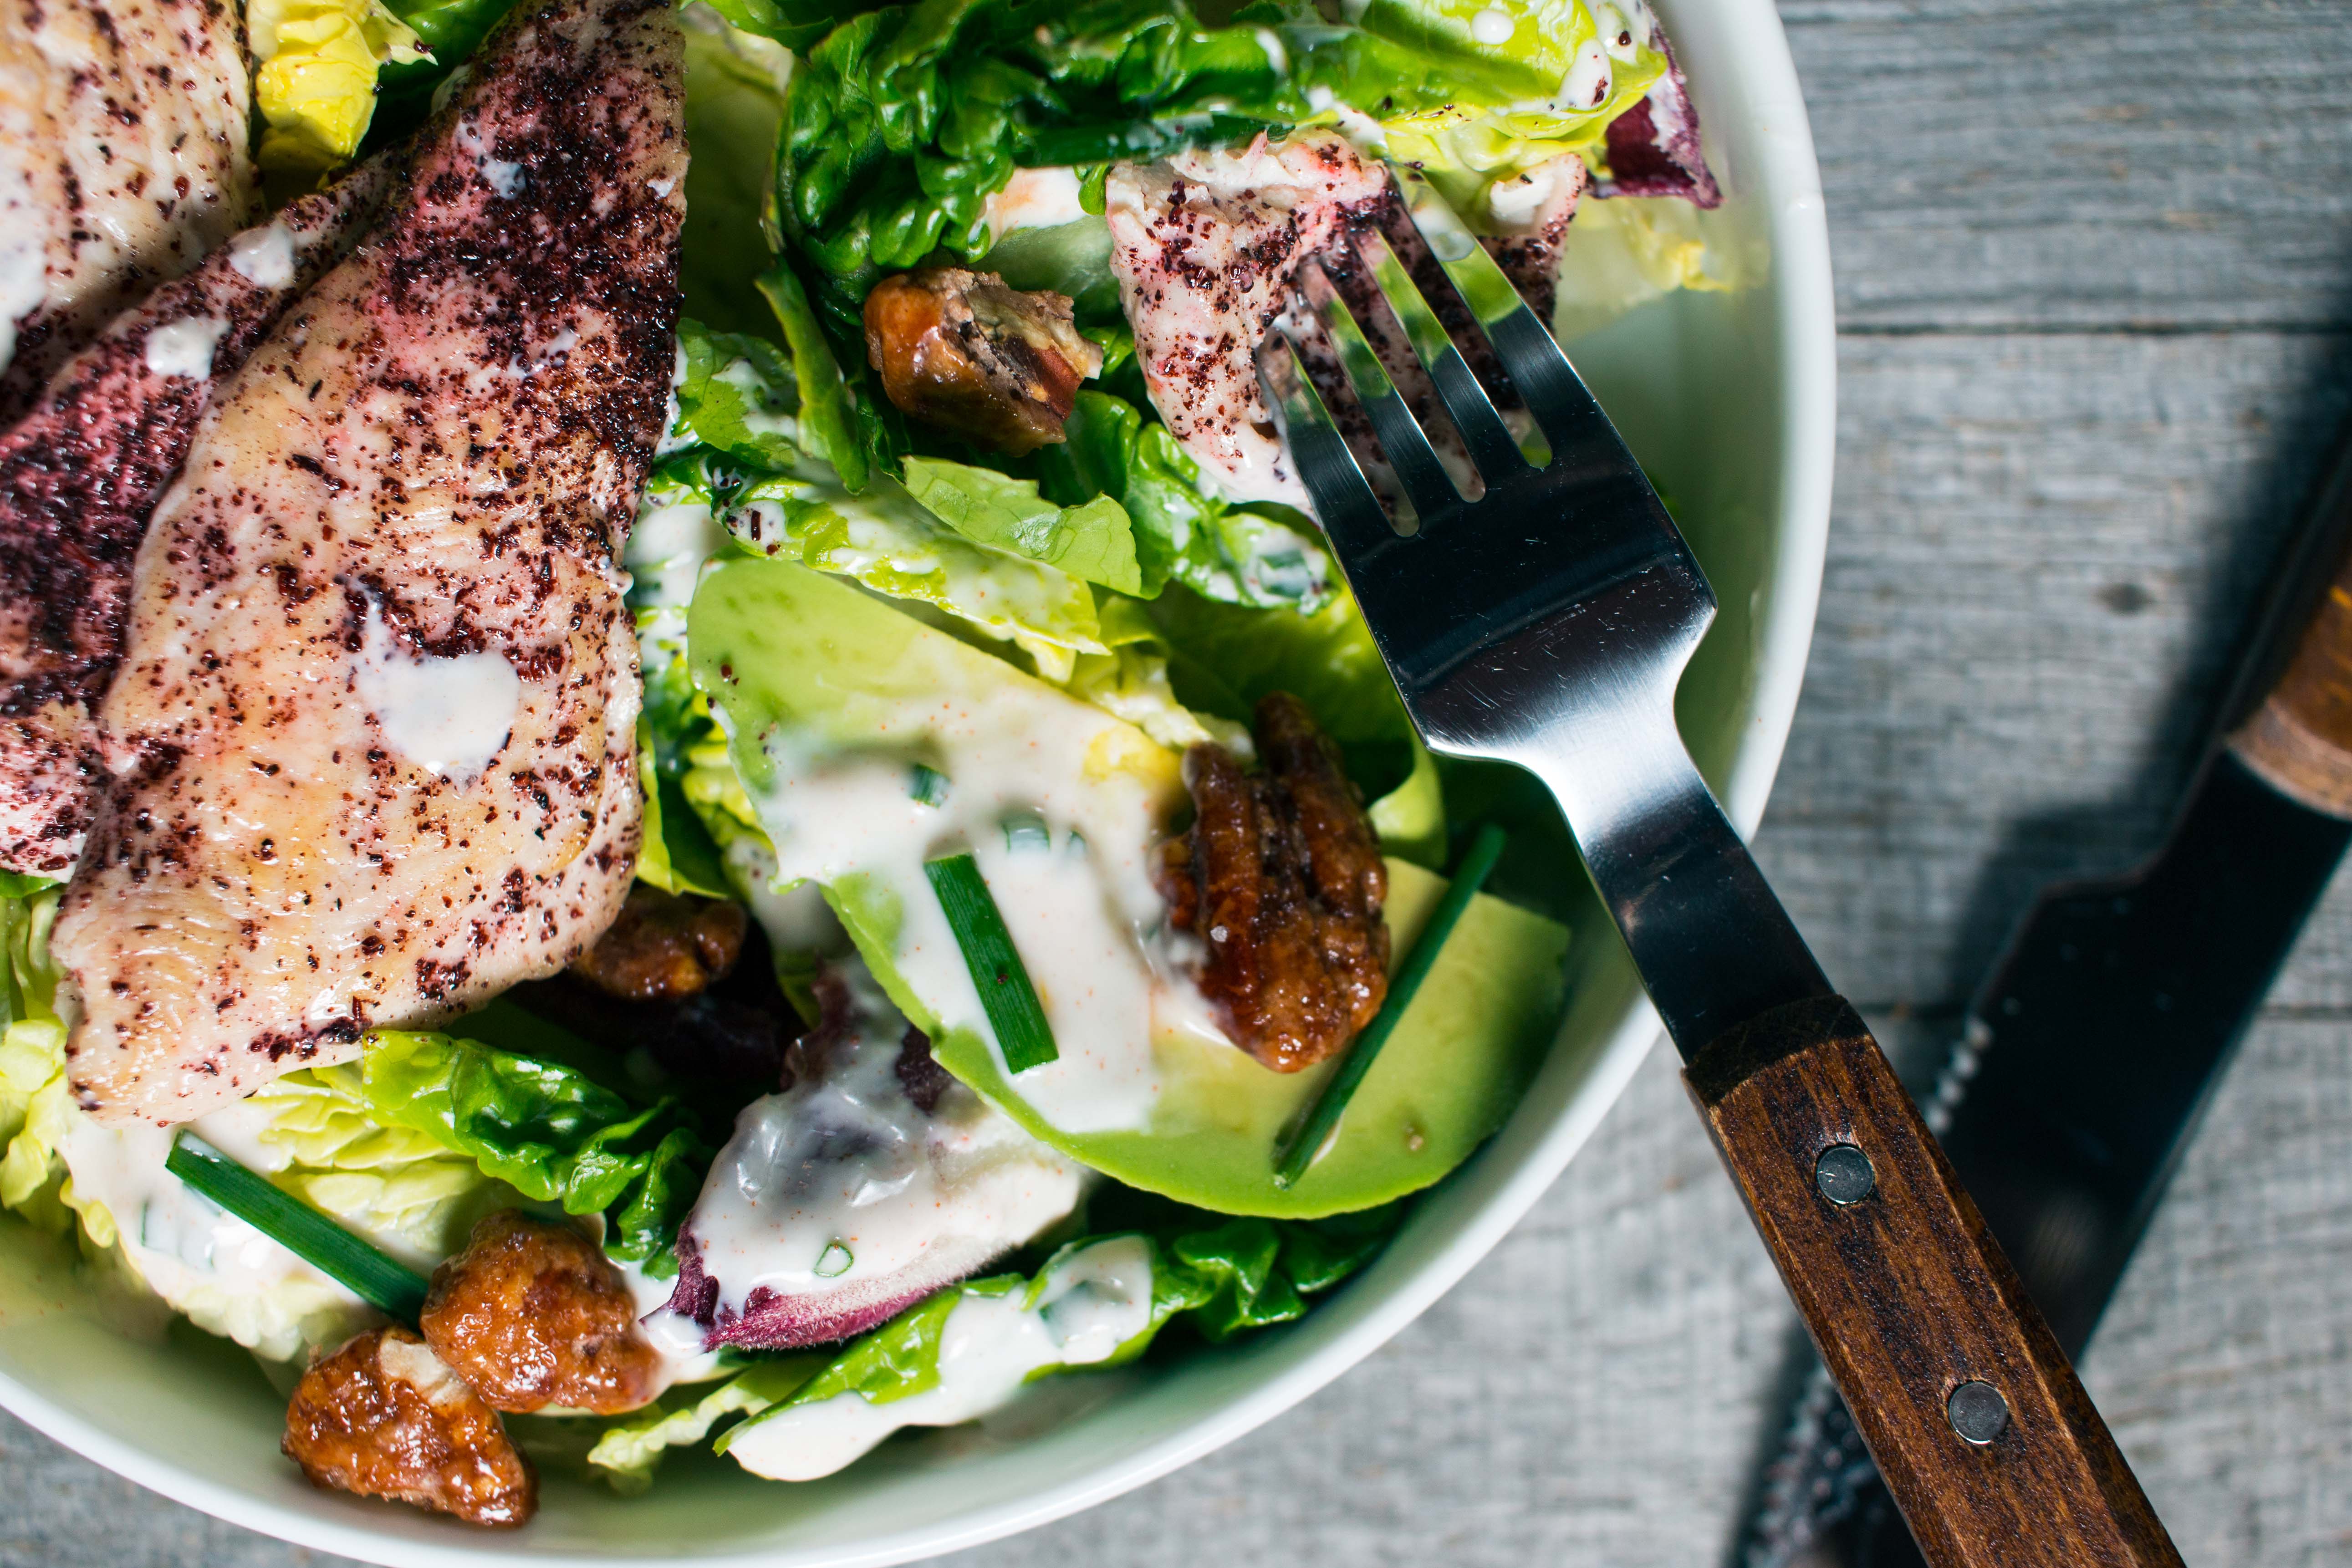 Sumac Chicken Salad with Labne Ranch Dressing | Recipe from I Will Not Eat Oysters